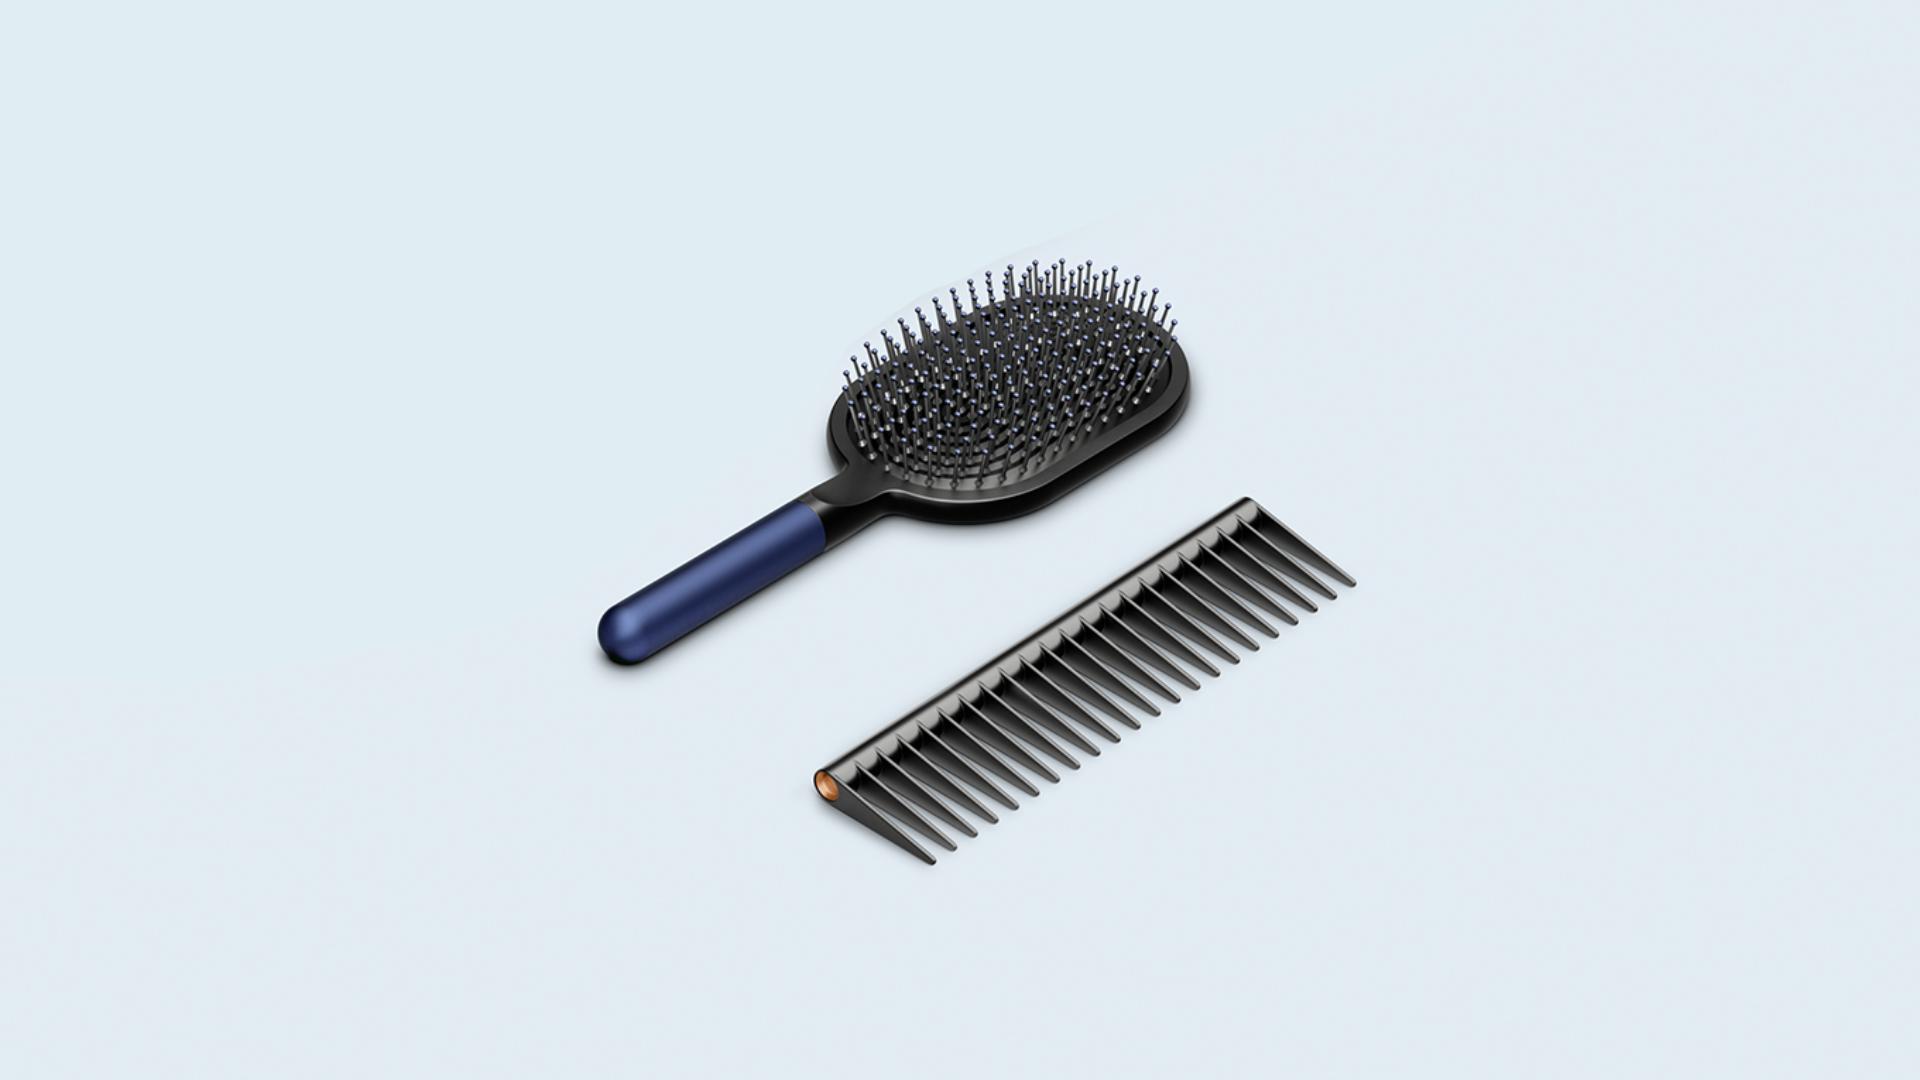 Dyson-designed Paddle brush and Detangling comb